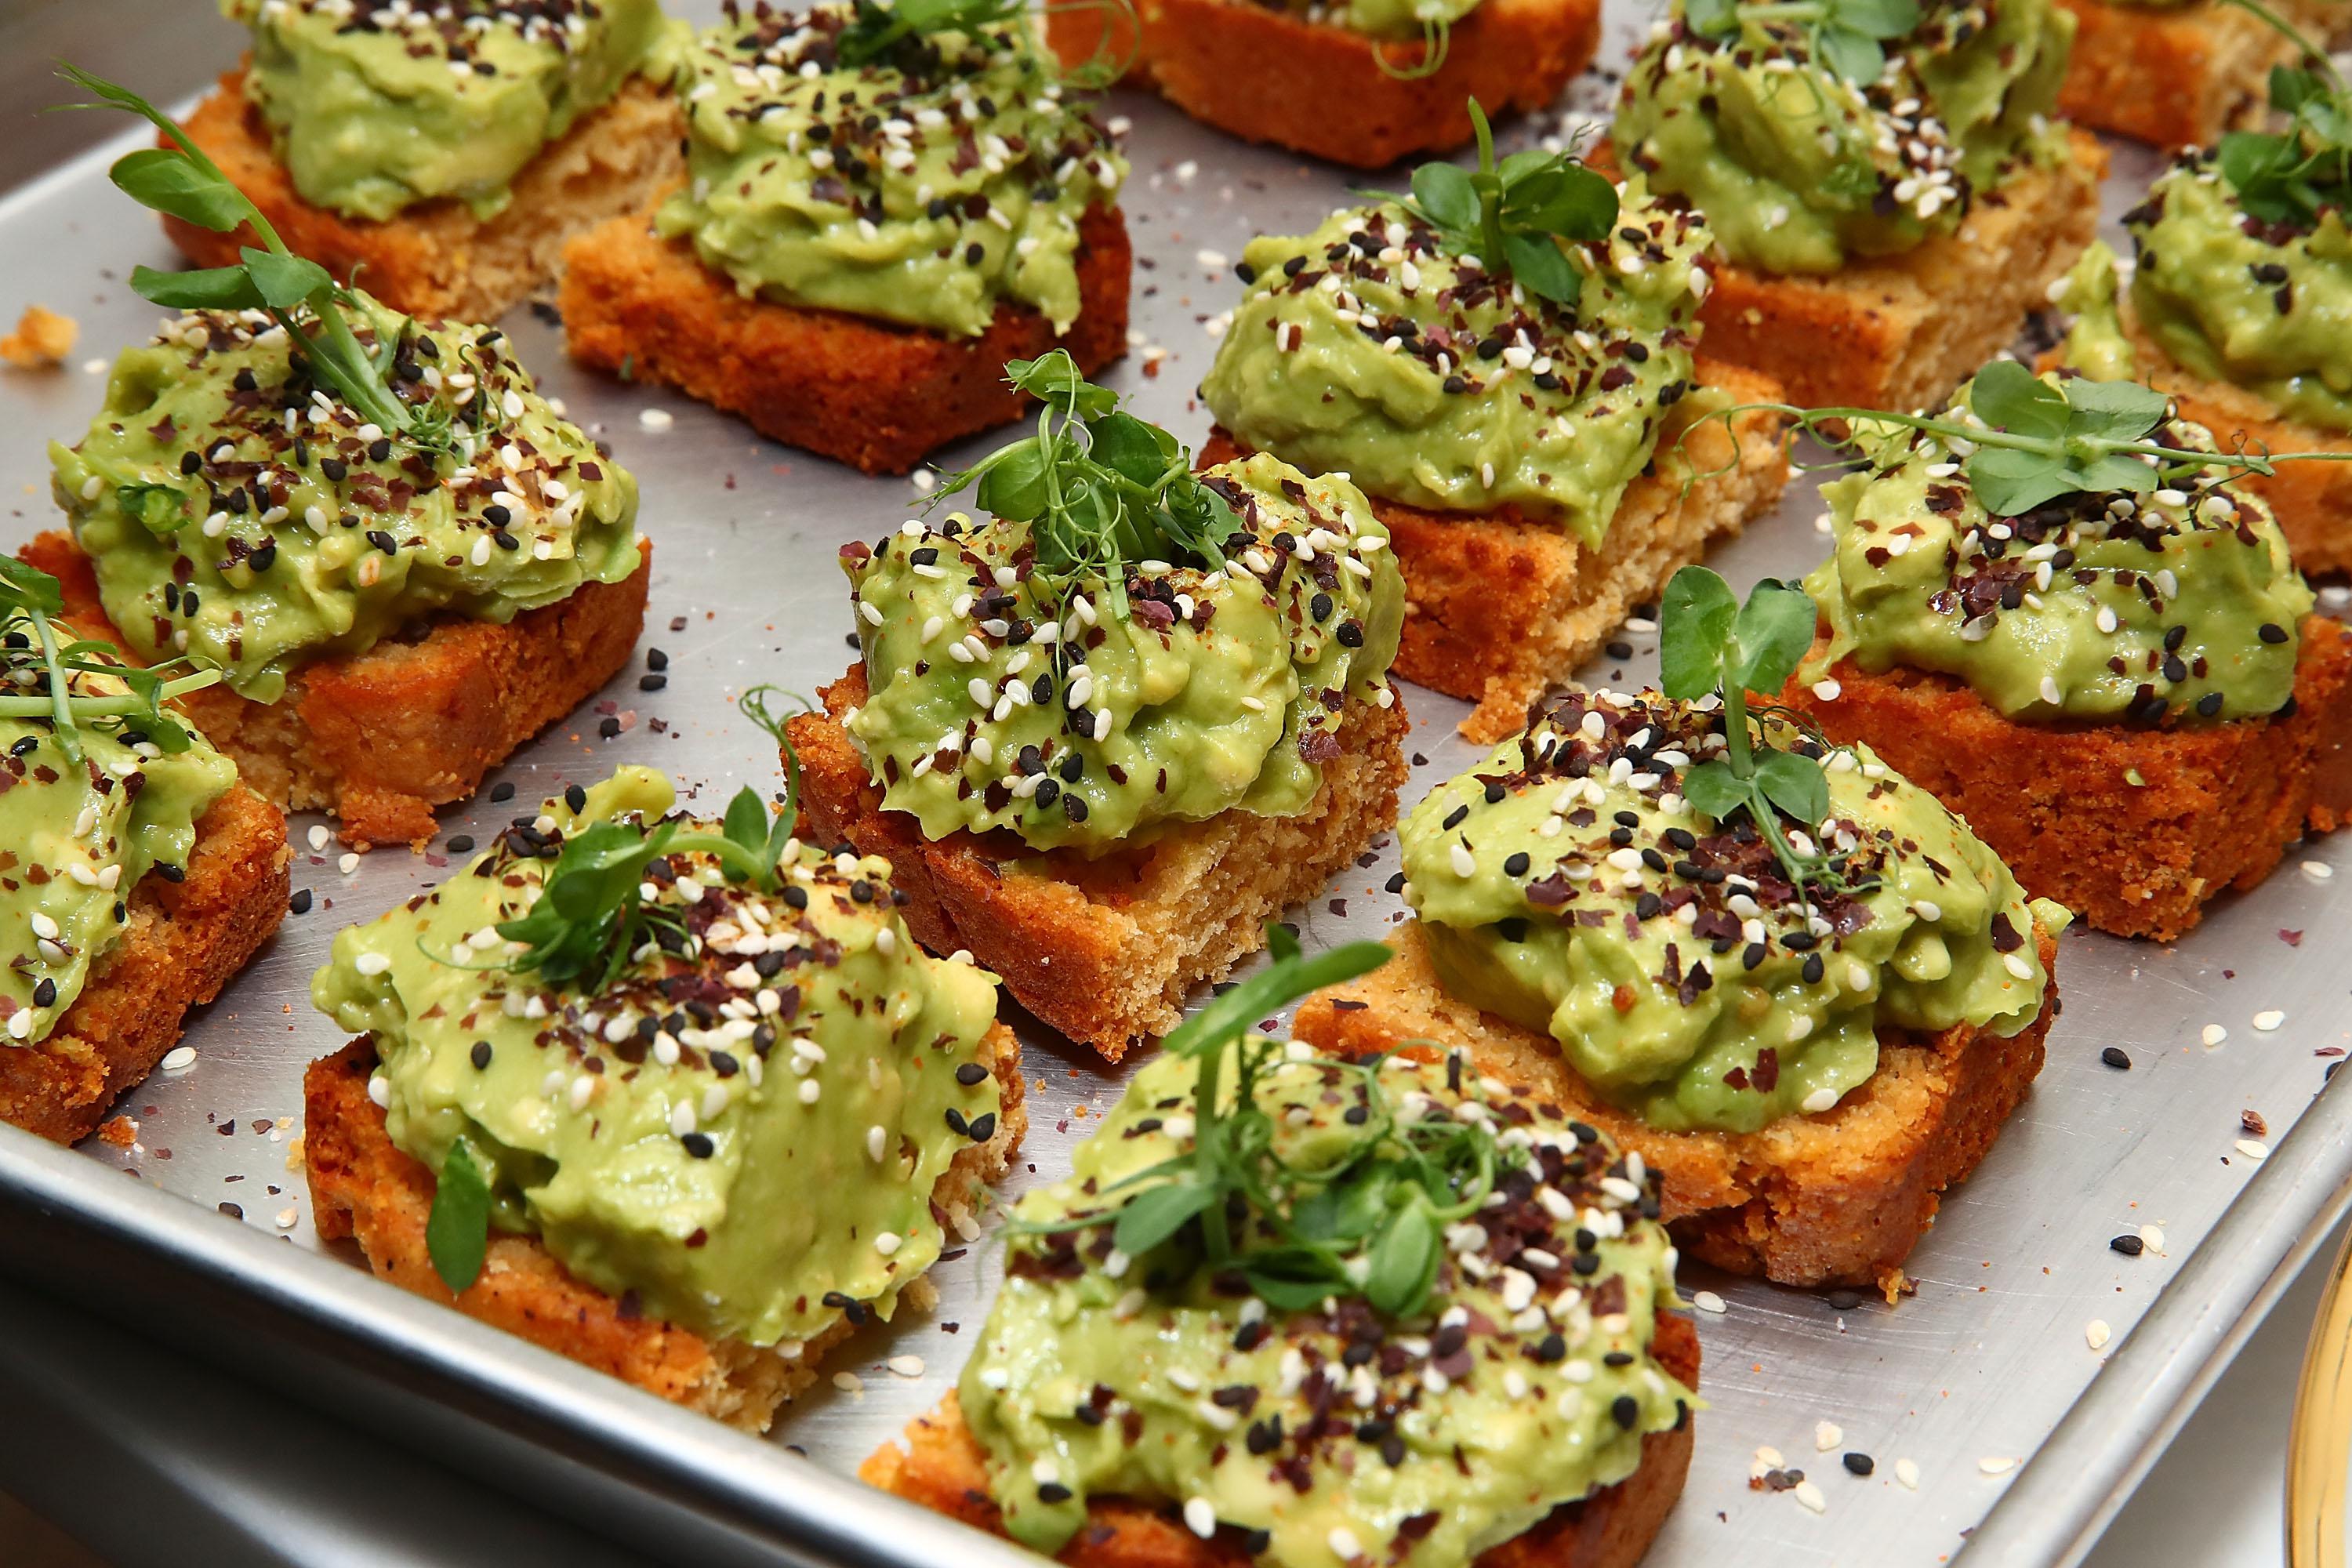 Rows of avocado toast sprinkled with sesame seeds sit on a metal sheet.